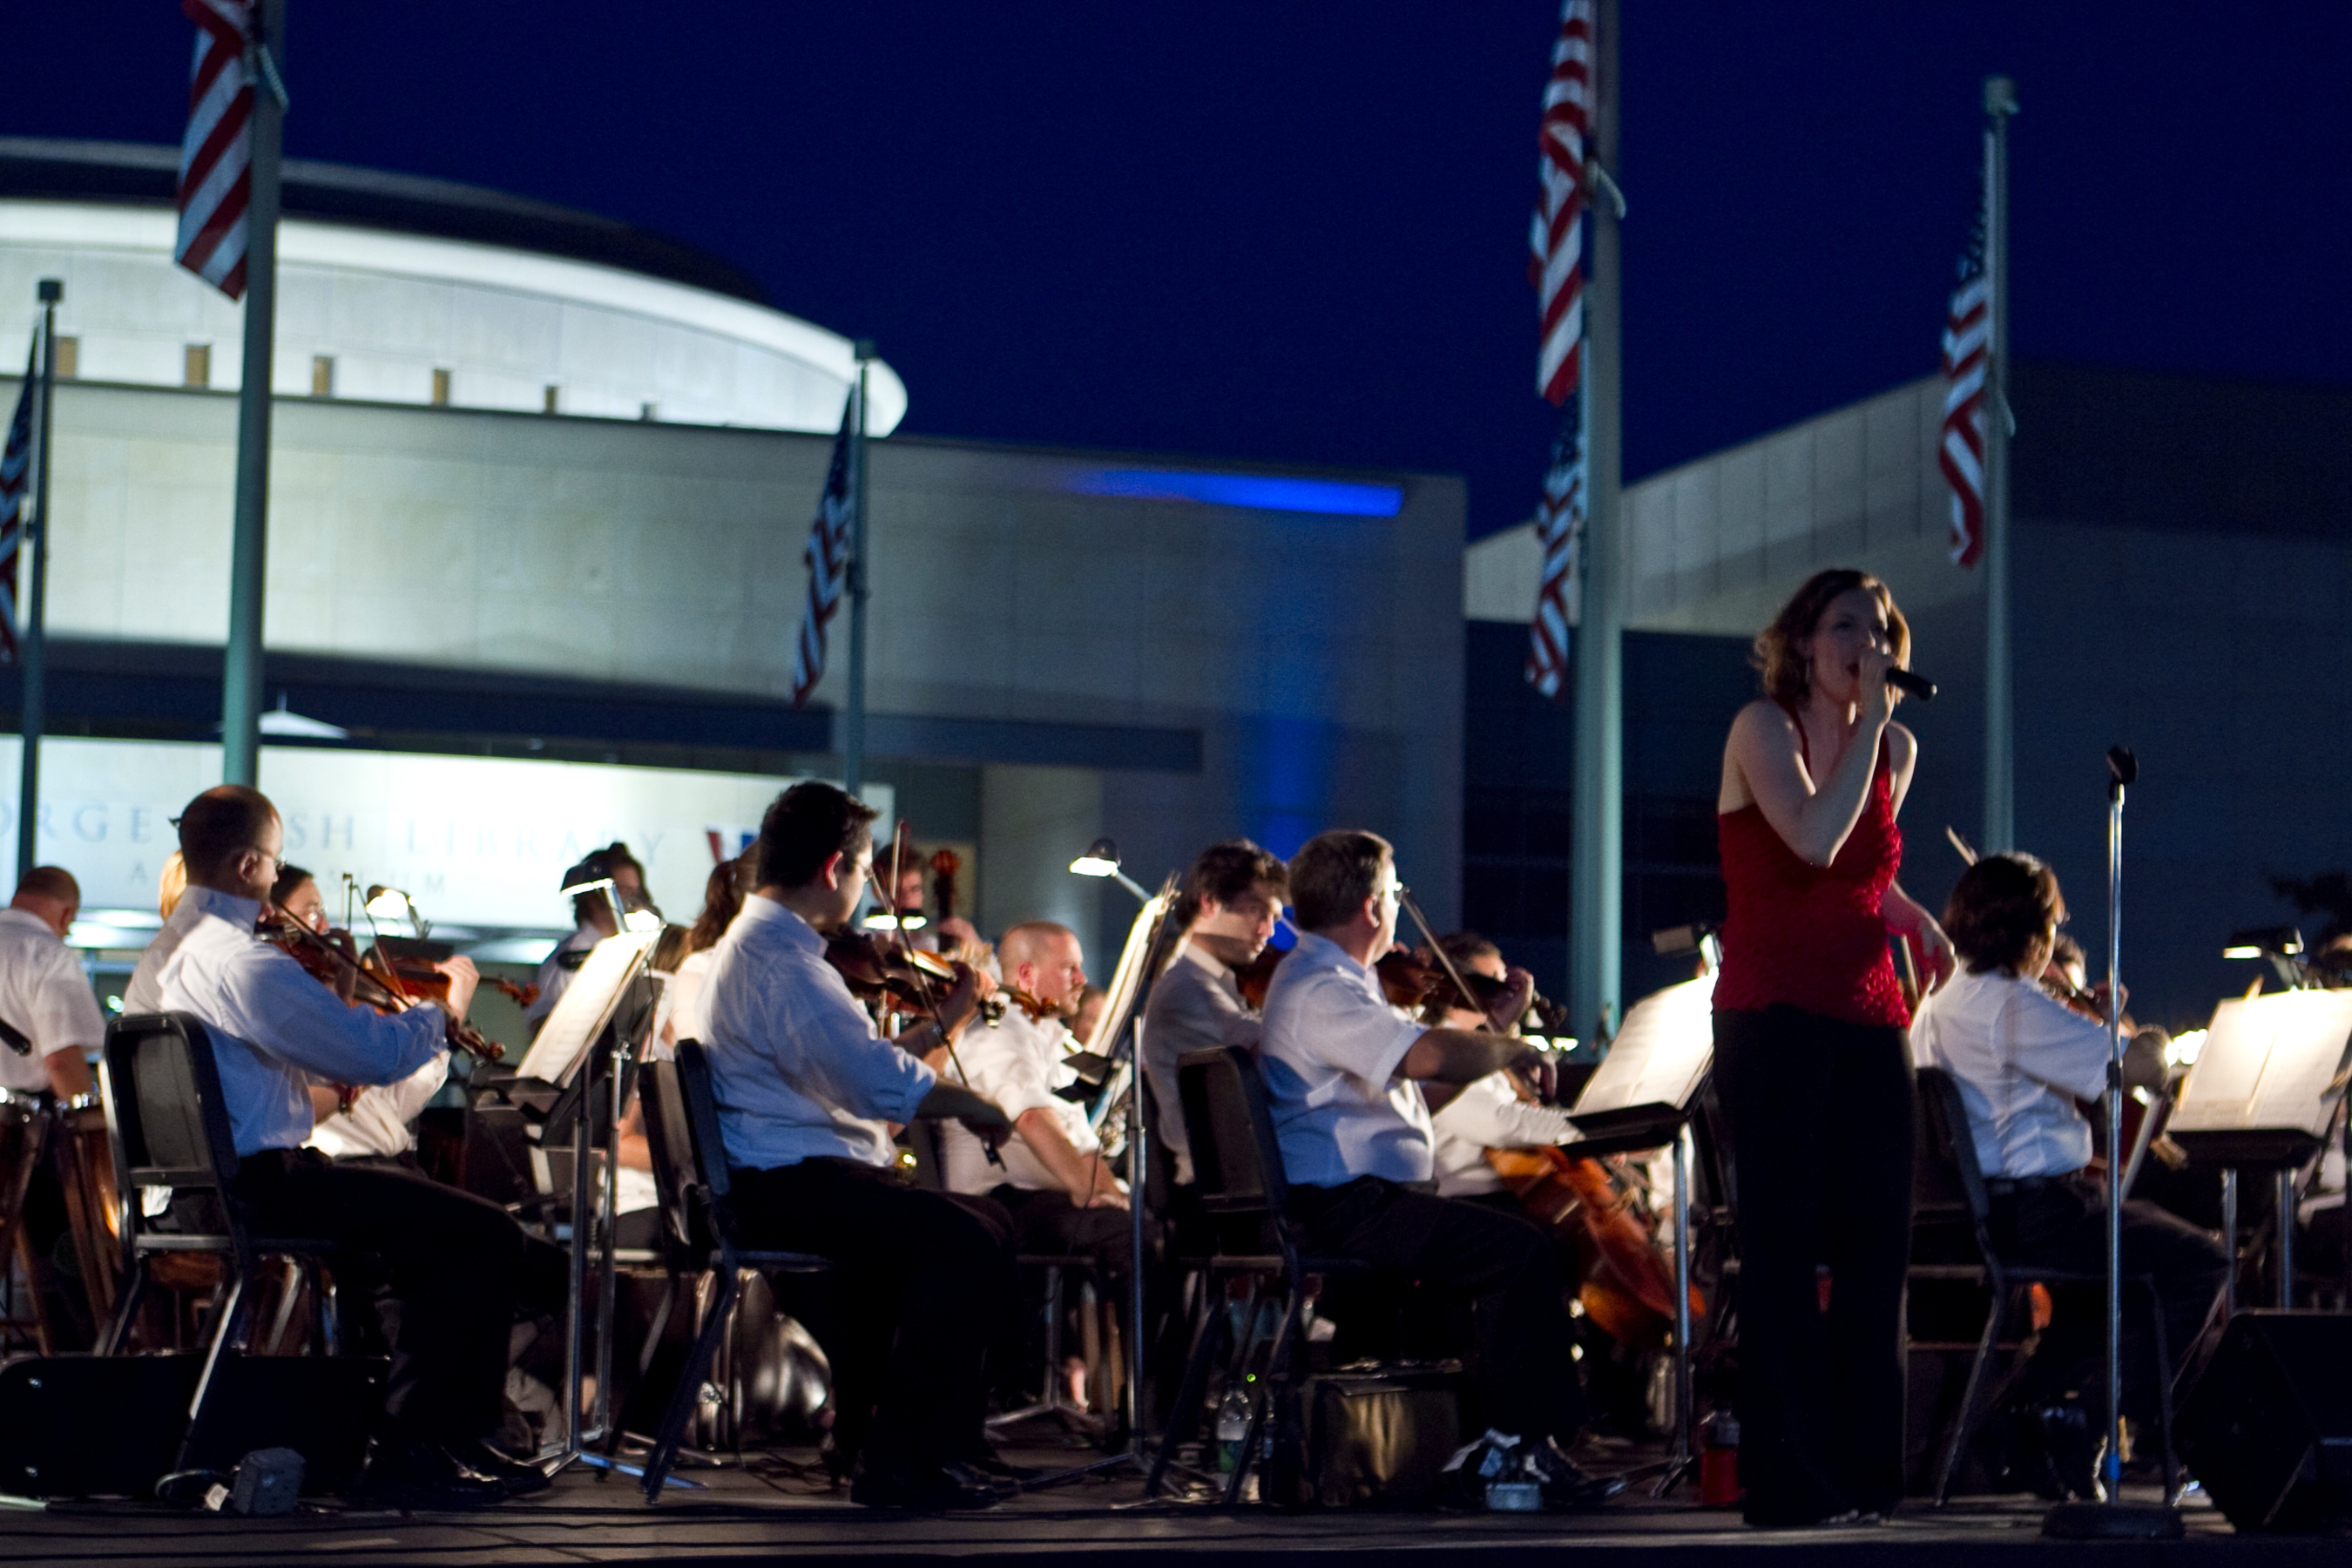 The Brazos Valley Symphony Orchestra and Kelsey Taylor perform the national anthem at the College Station Noon Lions Club's "I Love America" Celebration at the George Bush Presidential Library and Museum, July 4, 2011. (PRNewsFoto/George Bush Presidential Library)